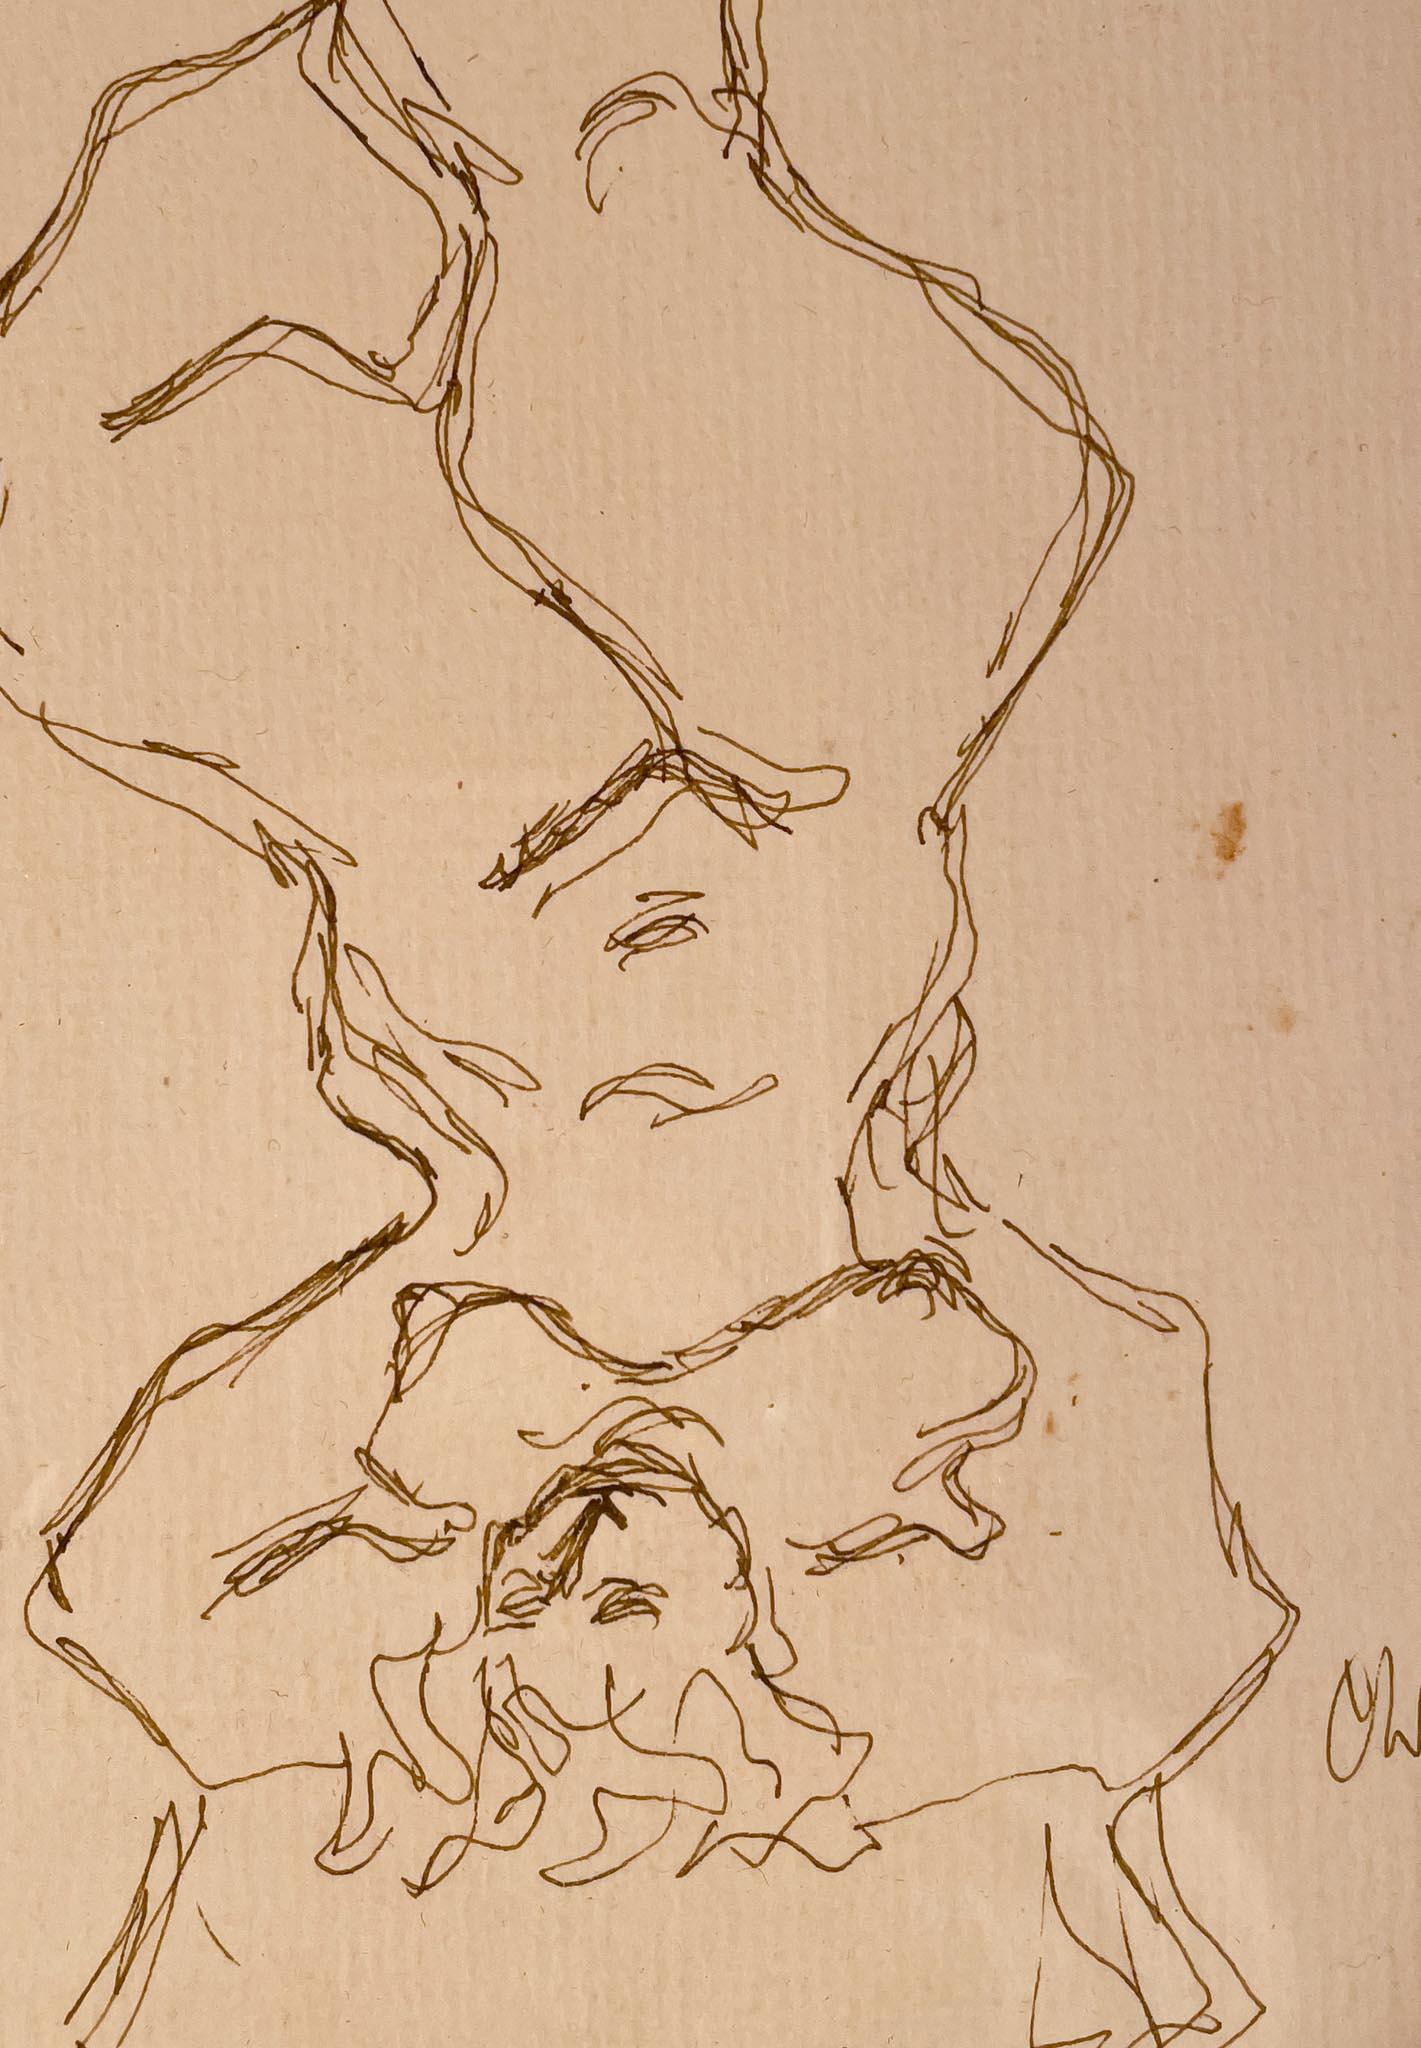 Study for Sculpture of Nude Woman Balancing Baby - Beige Figurative Art by Chaim Gross